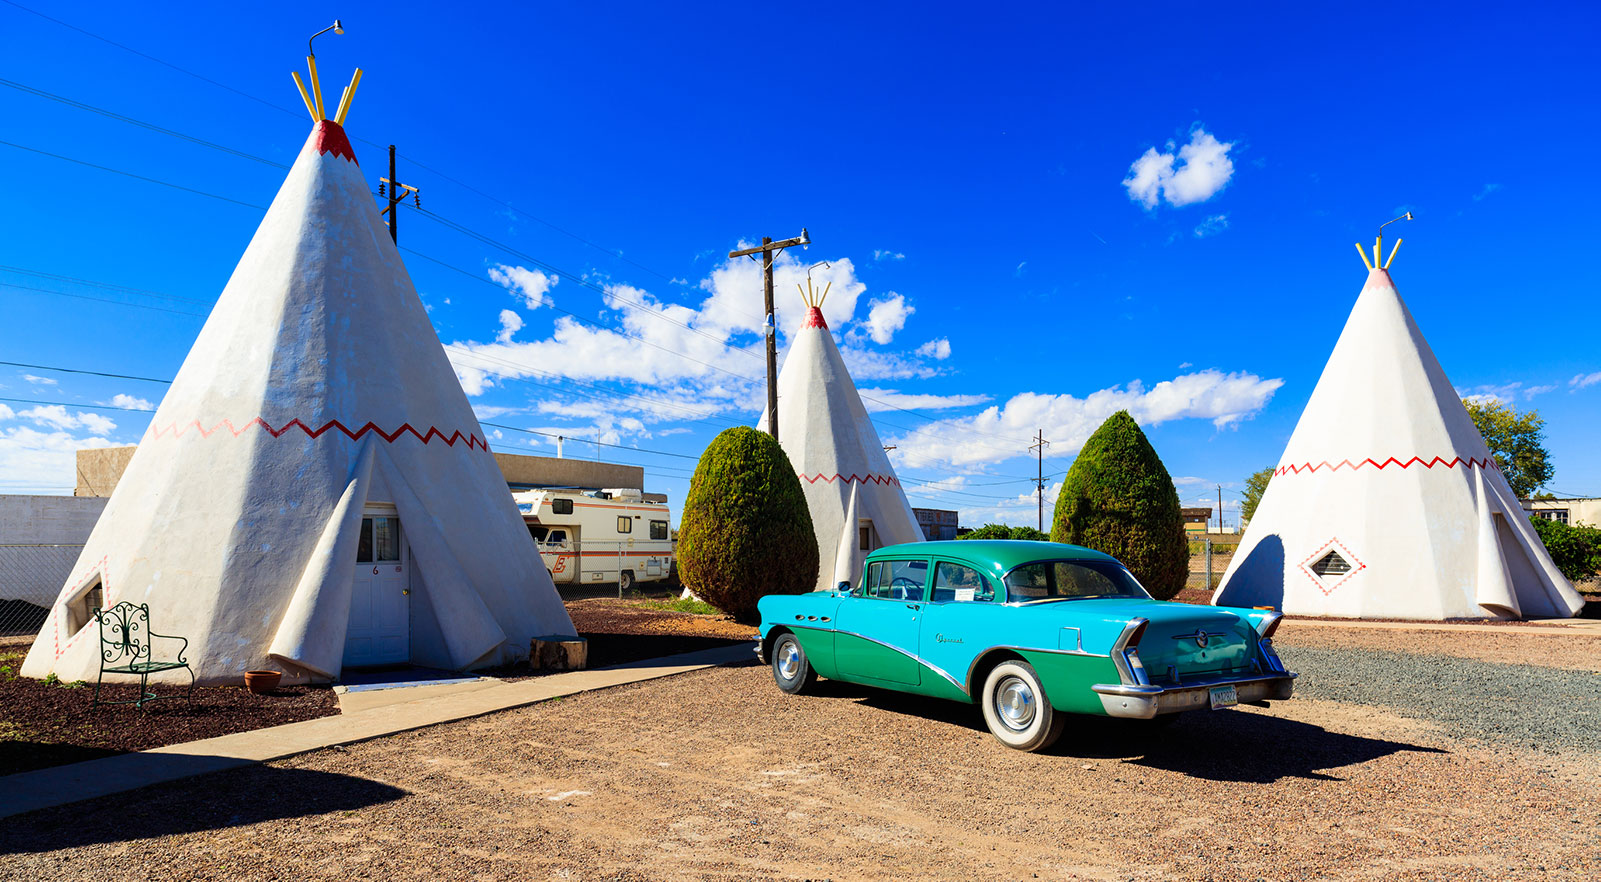 Classic car outside the teepee structures of the Wigwam Motel in Holbrook Arizona